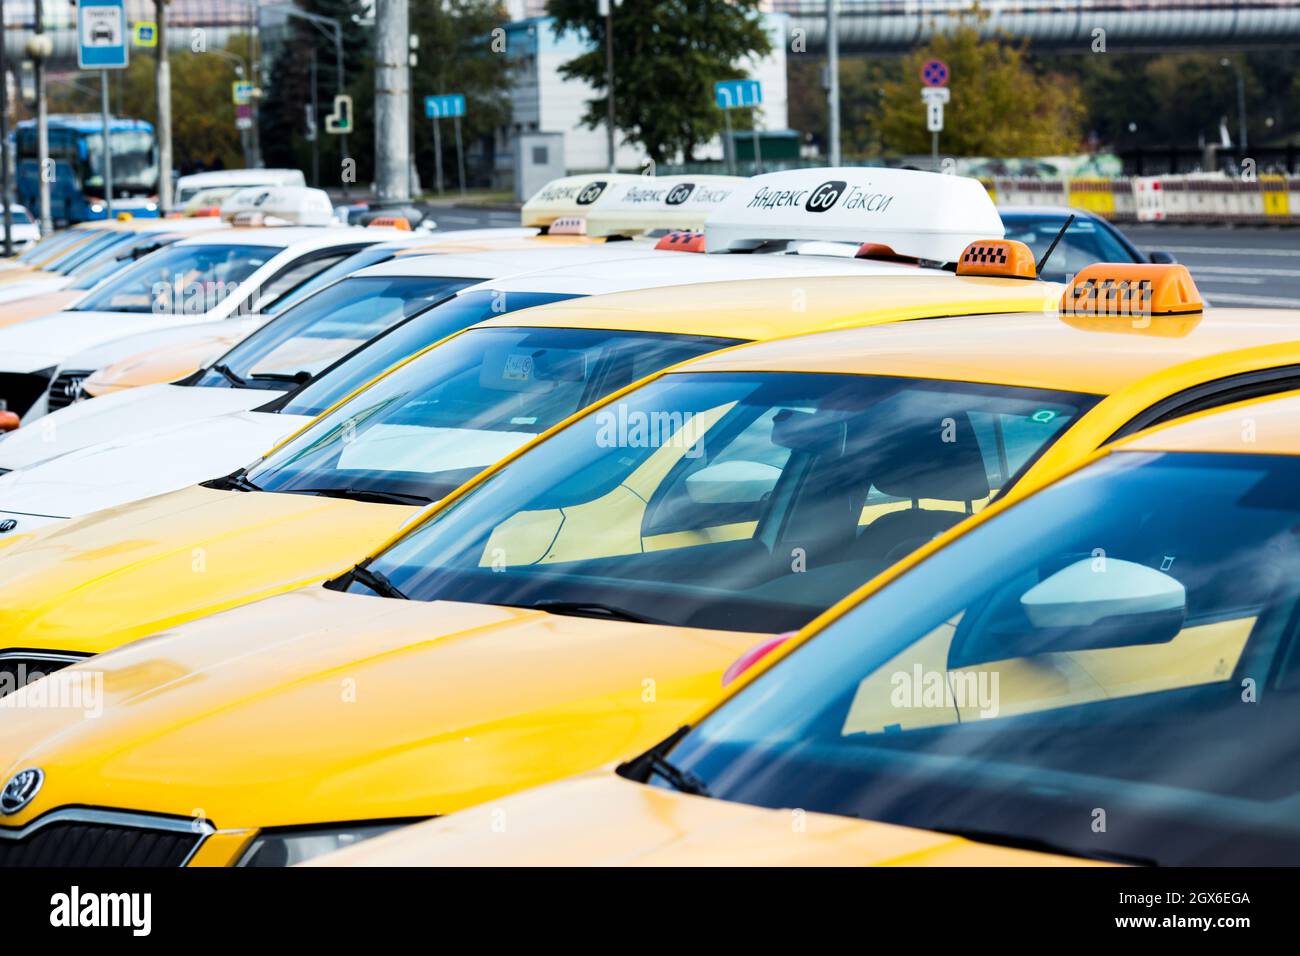 Moscow, Russia - October 4, 2021: Taxi parking on the street near to Moscow City. Stock Photo